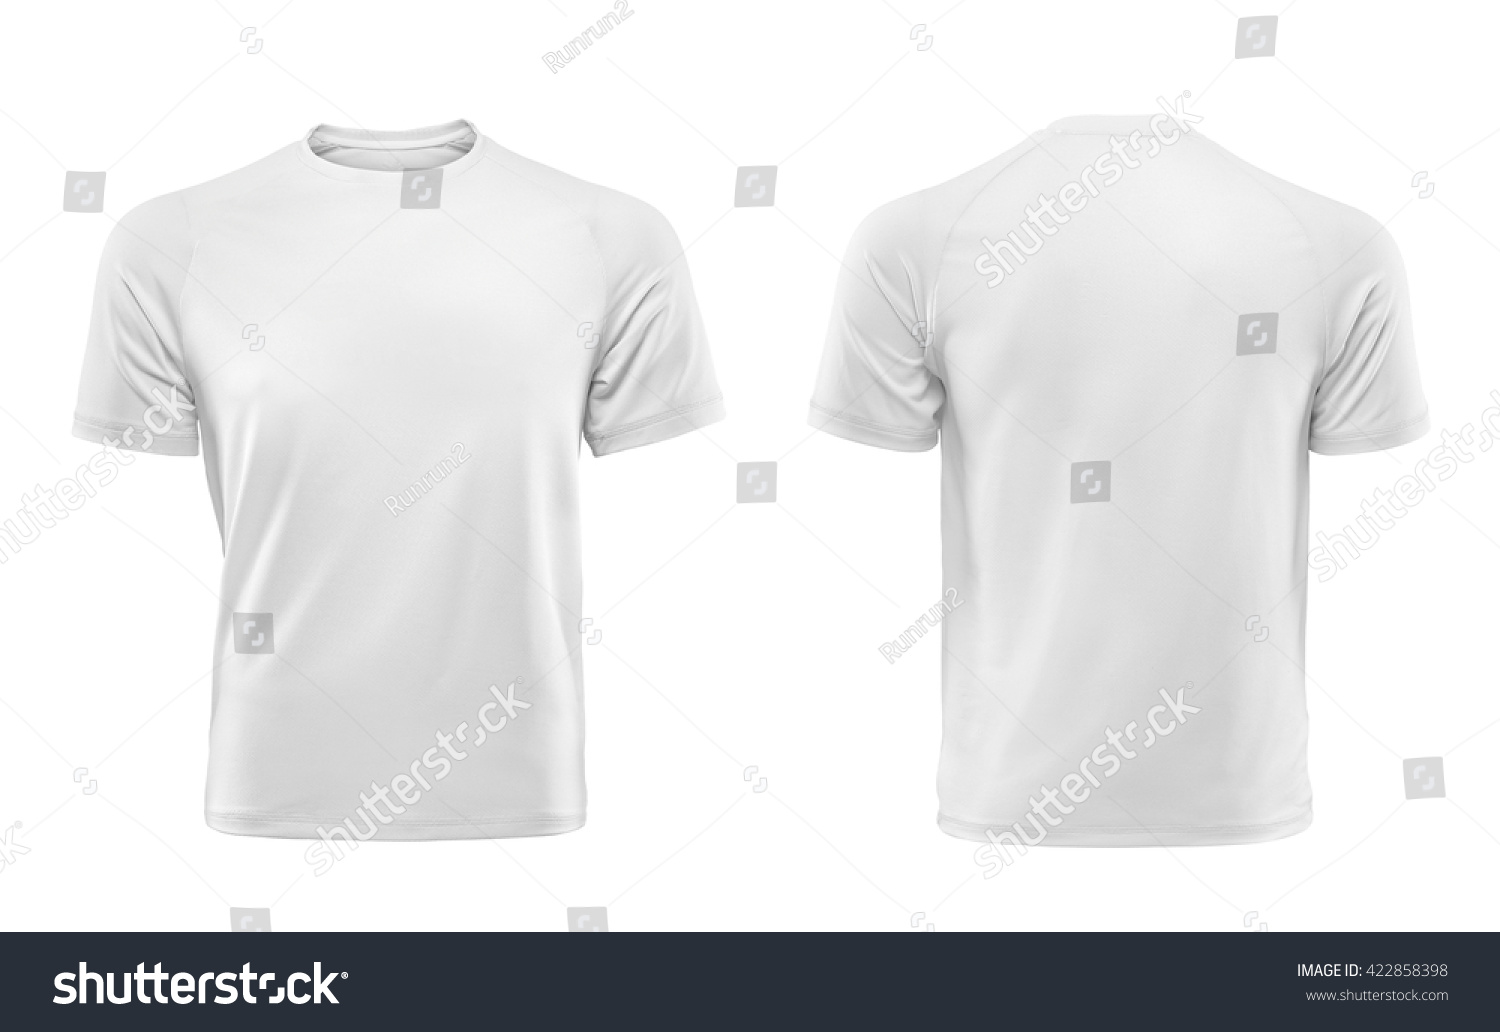 White T-shirts front and back used as design template. #422858398